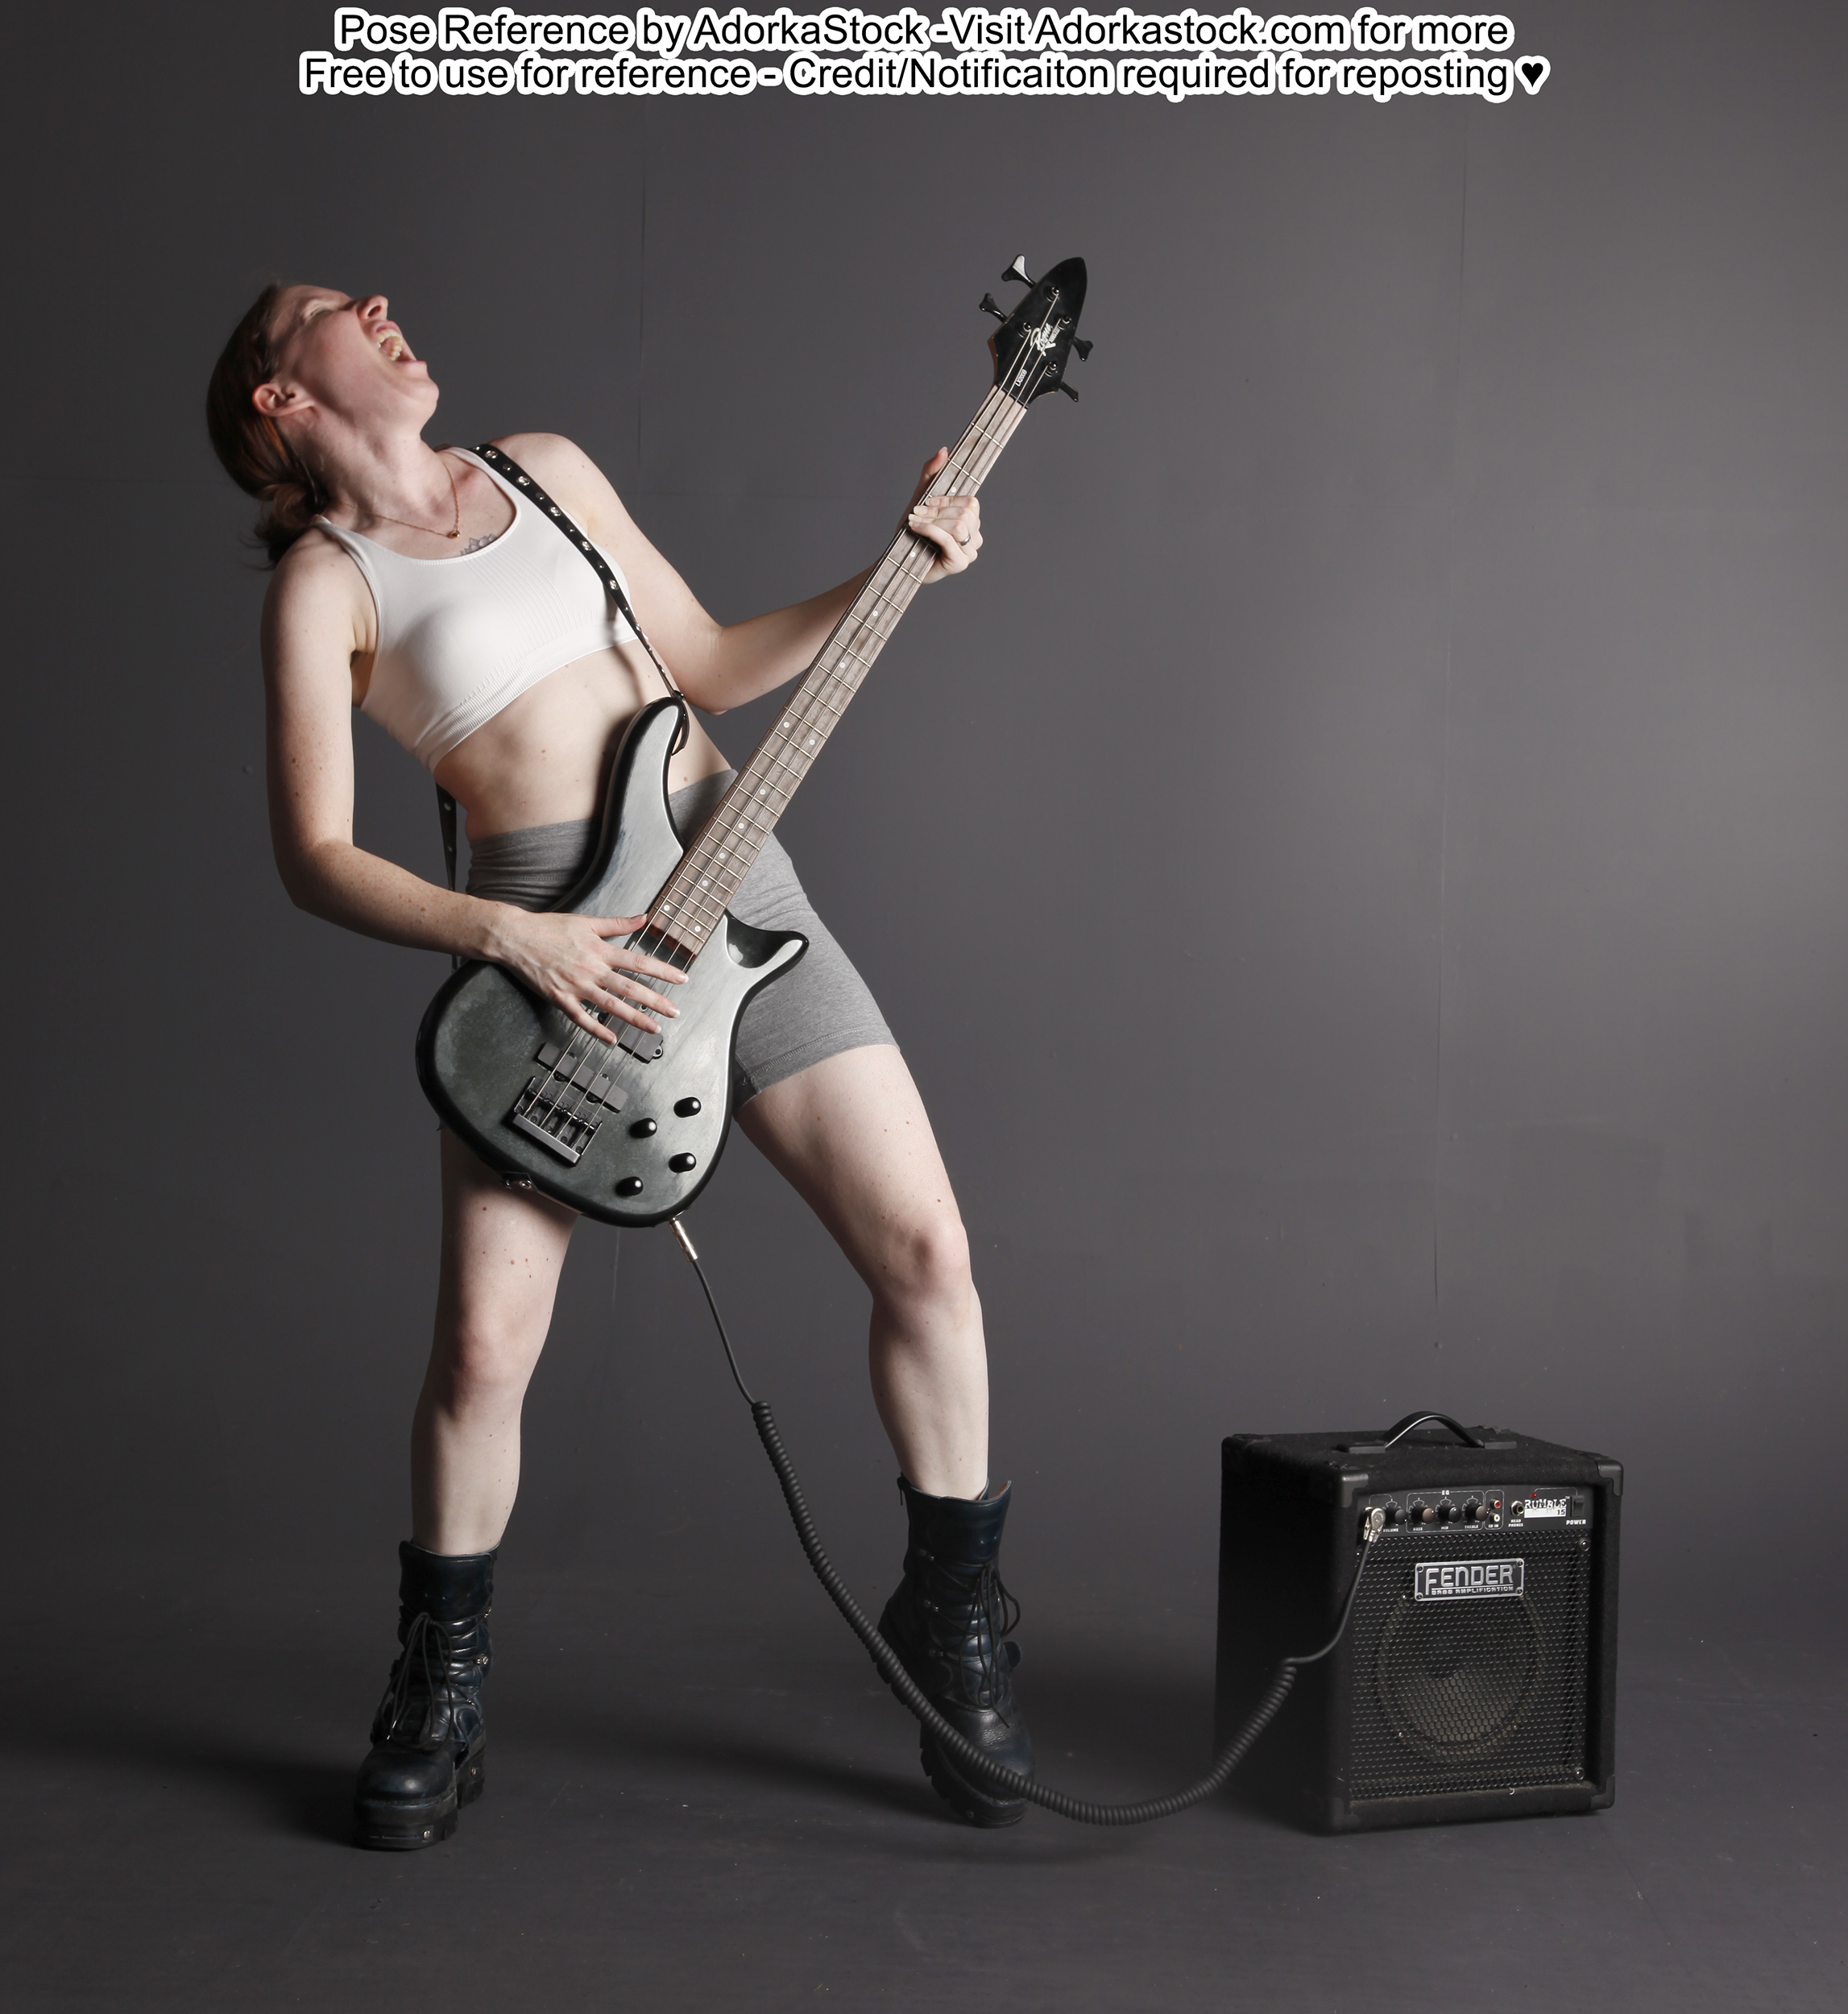 Woman playing bass guitar pose reference rocking out with head back yelling